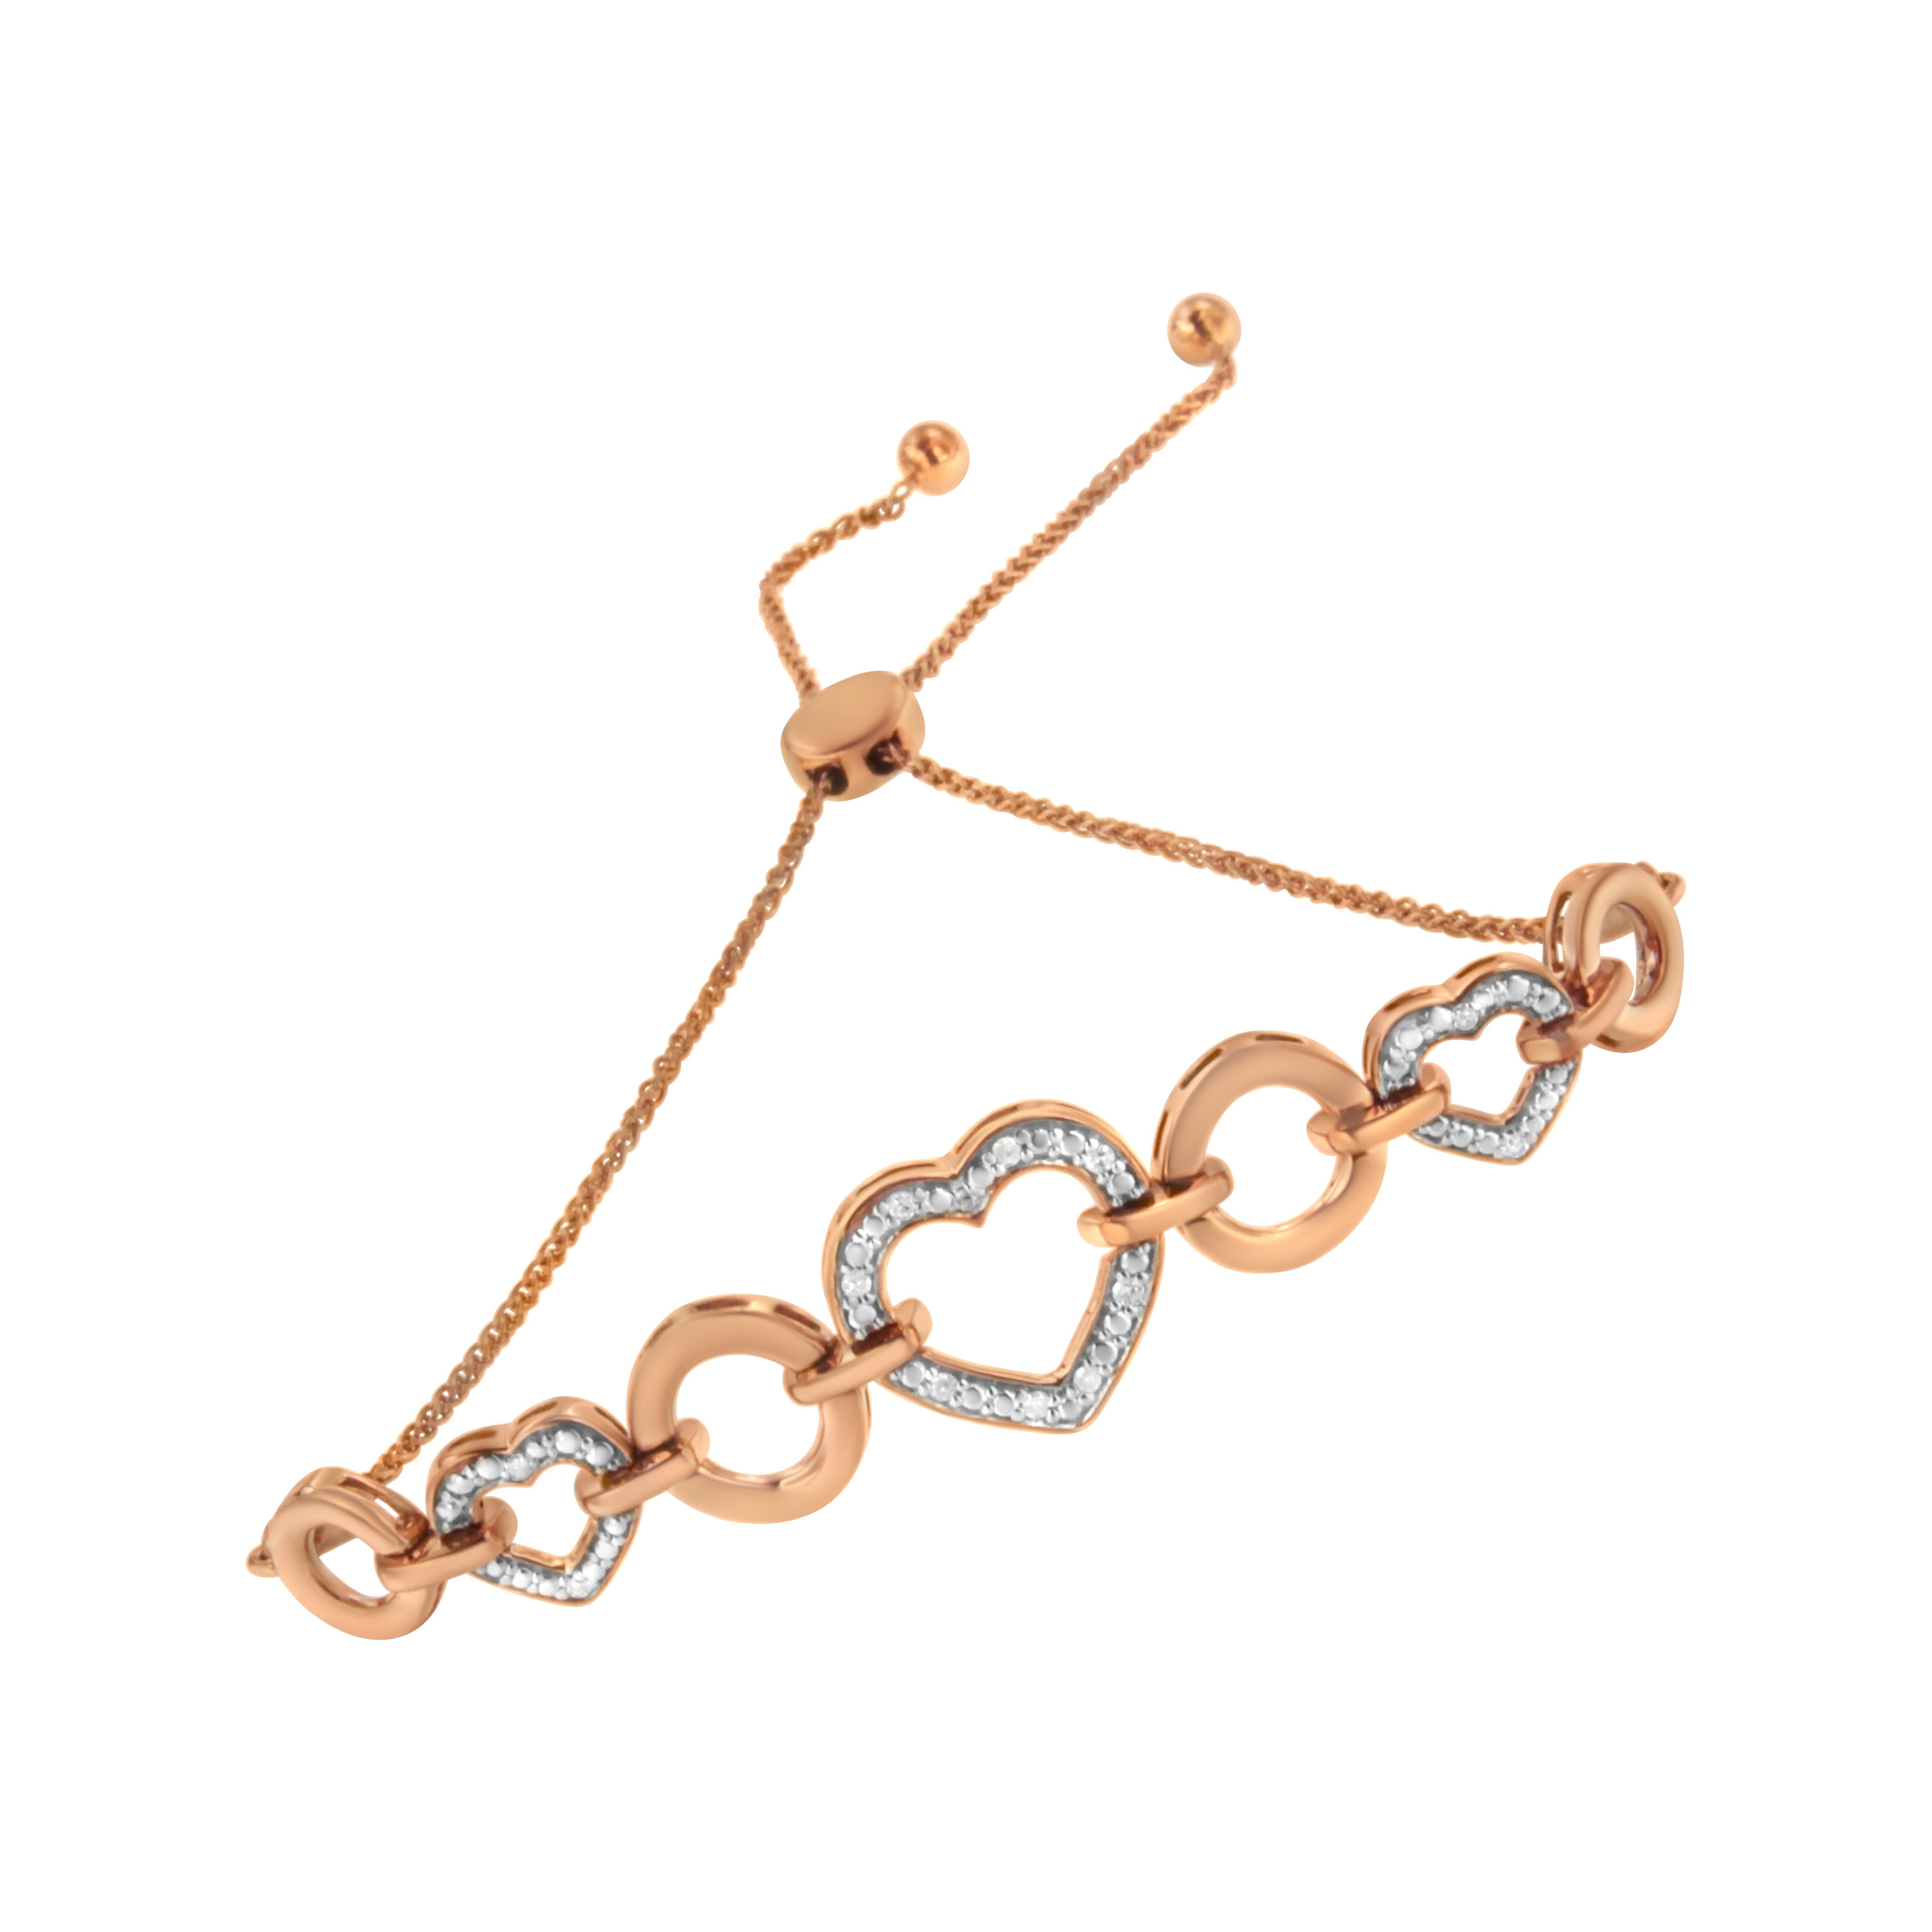 You will absolutely love this trendy and chic 14k rose gold plated .925 sterling silver bolo bracelet. The piece features a design of rose gold circles alternating with heart link embellished with round-cut, pave set diamonds. The bracelet features